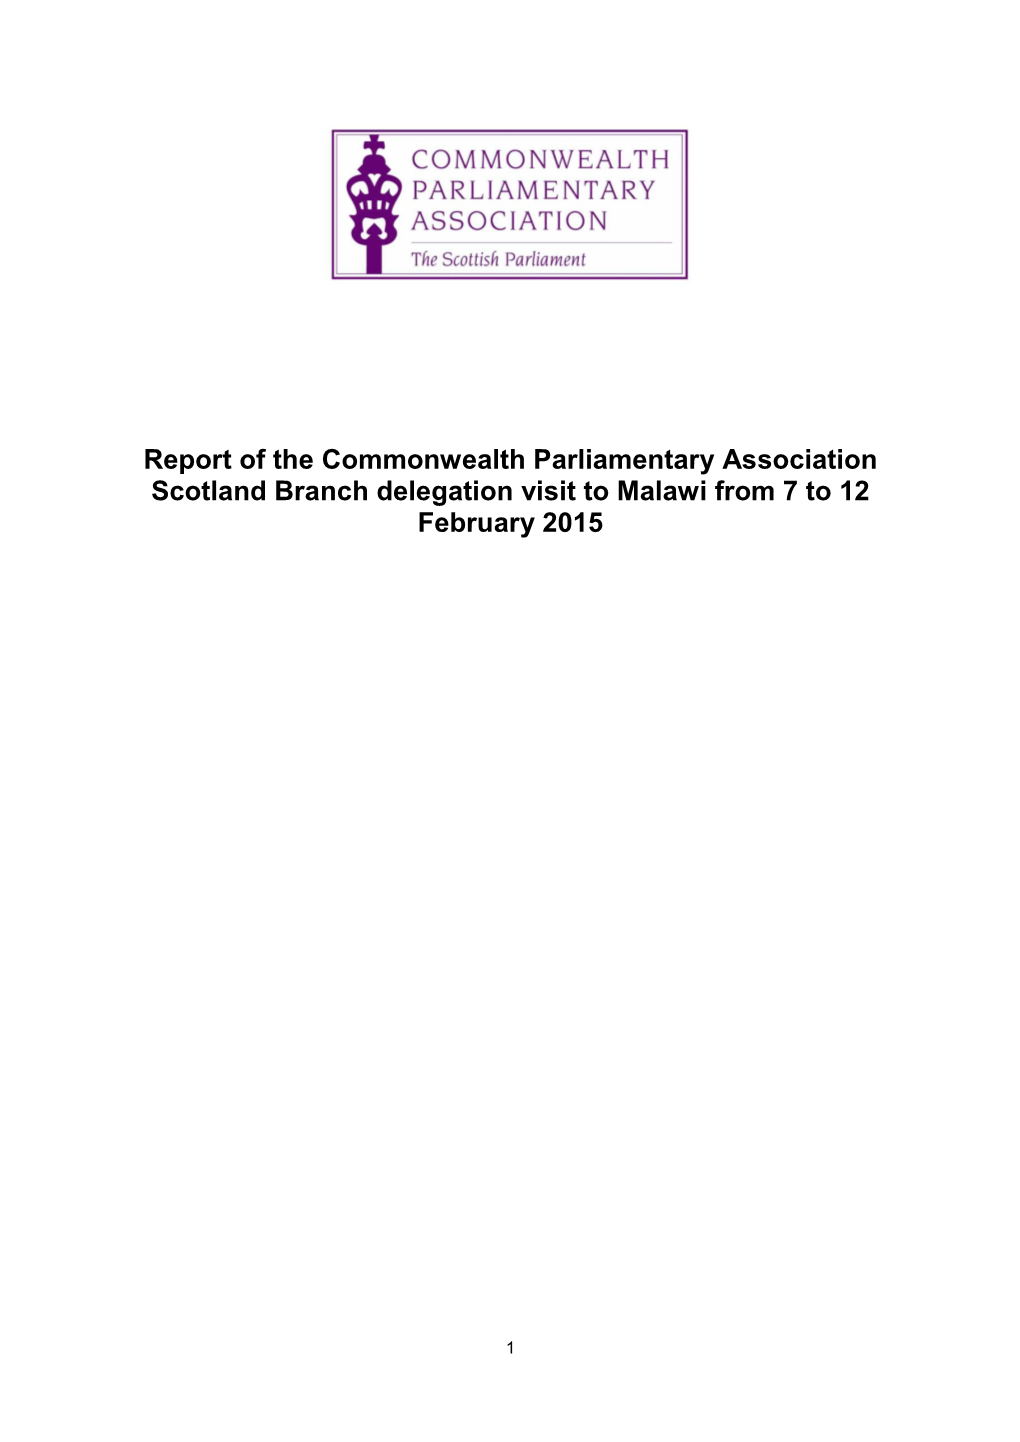 Report of the Commonwealth Parliamentary Association Scotland Branch Delegation Visit to Malawi from 7 to 12 February 2015